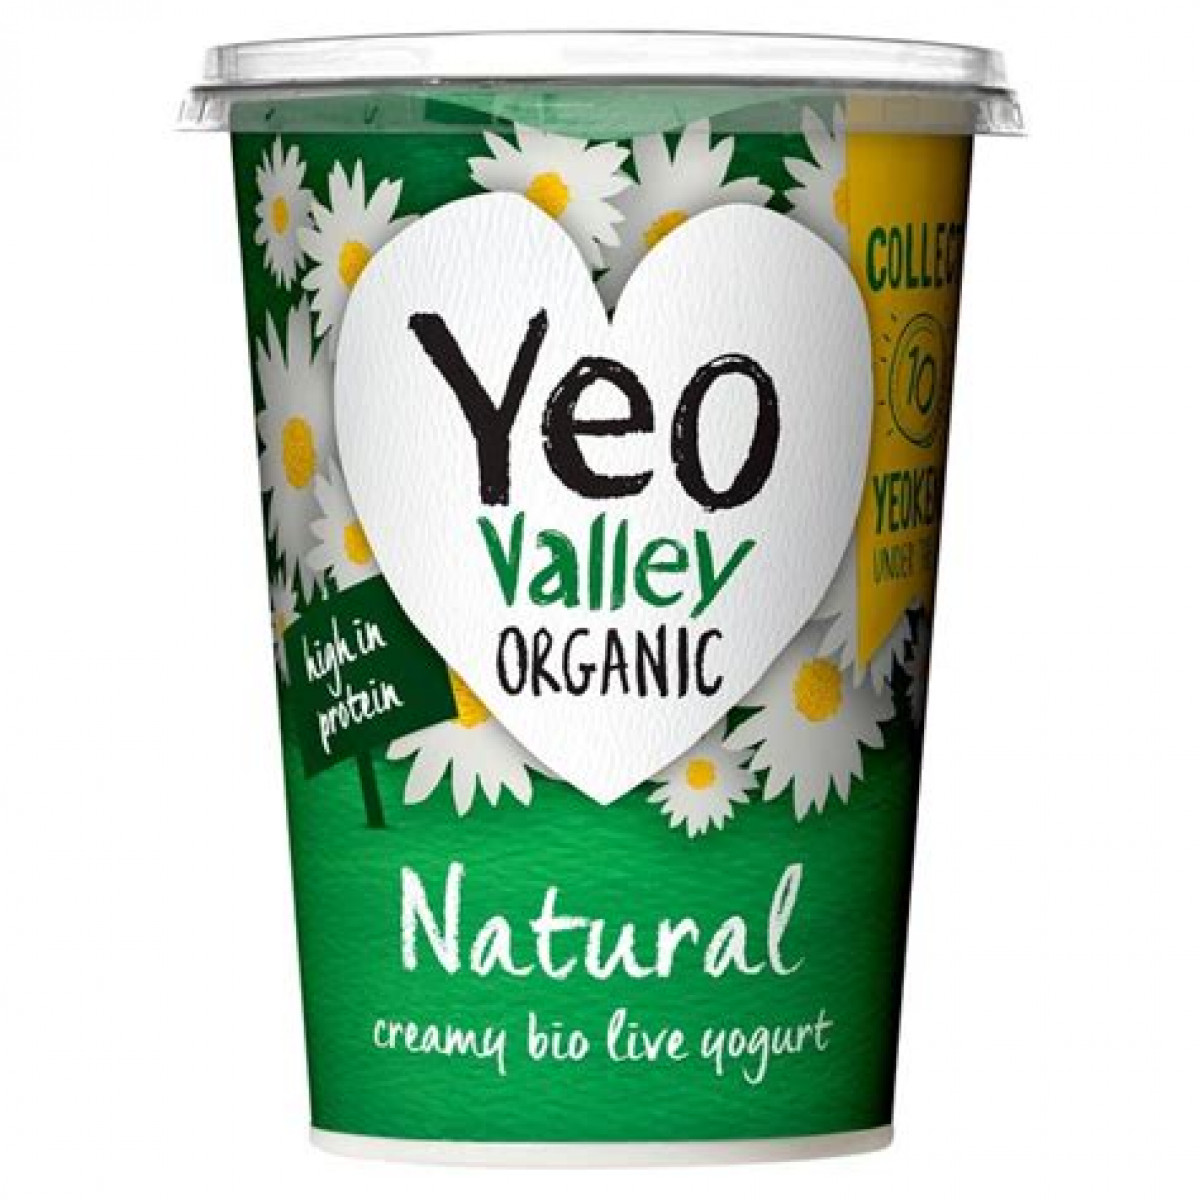 Product picture for Yogurt Natural